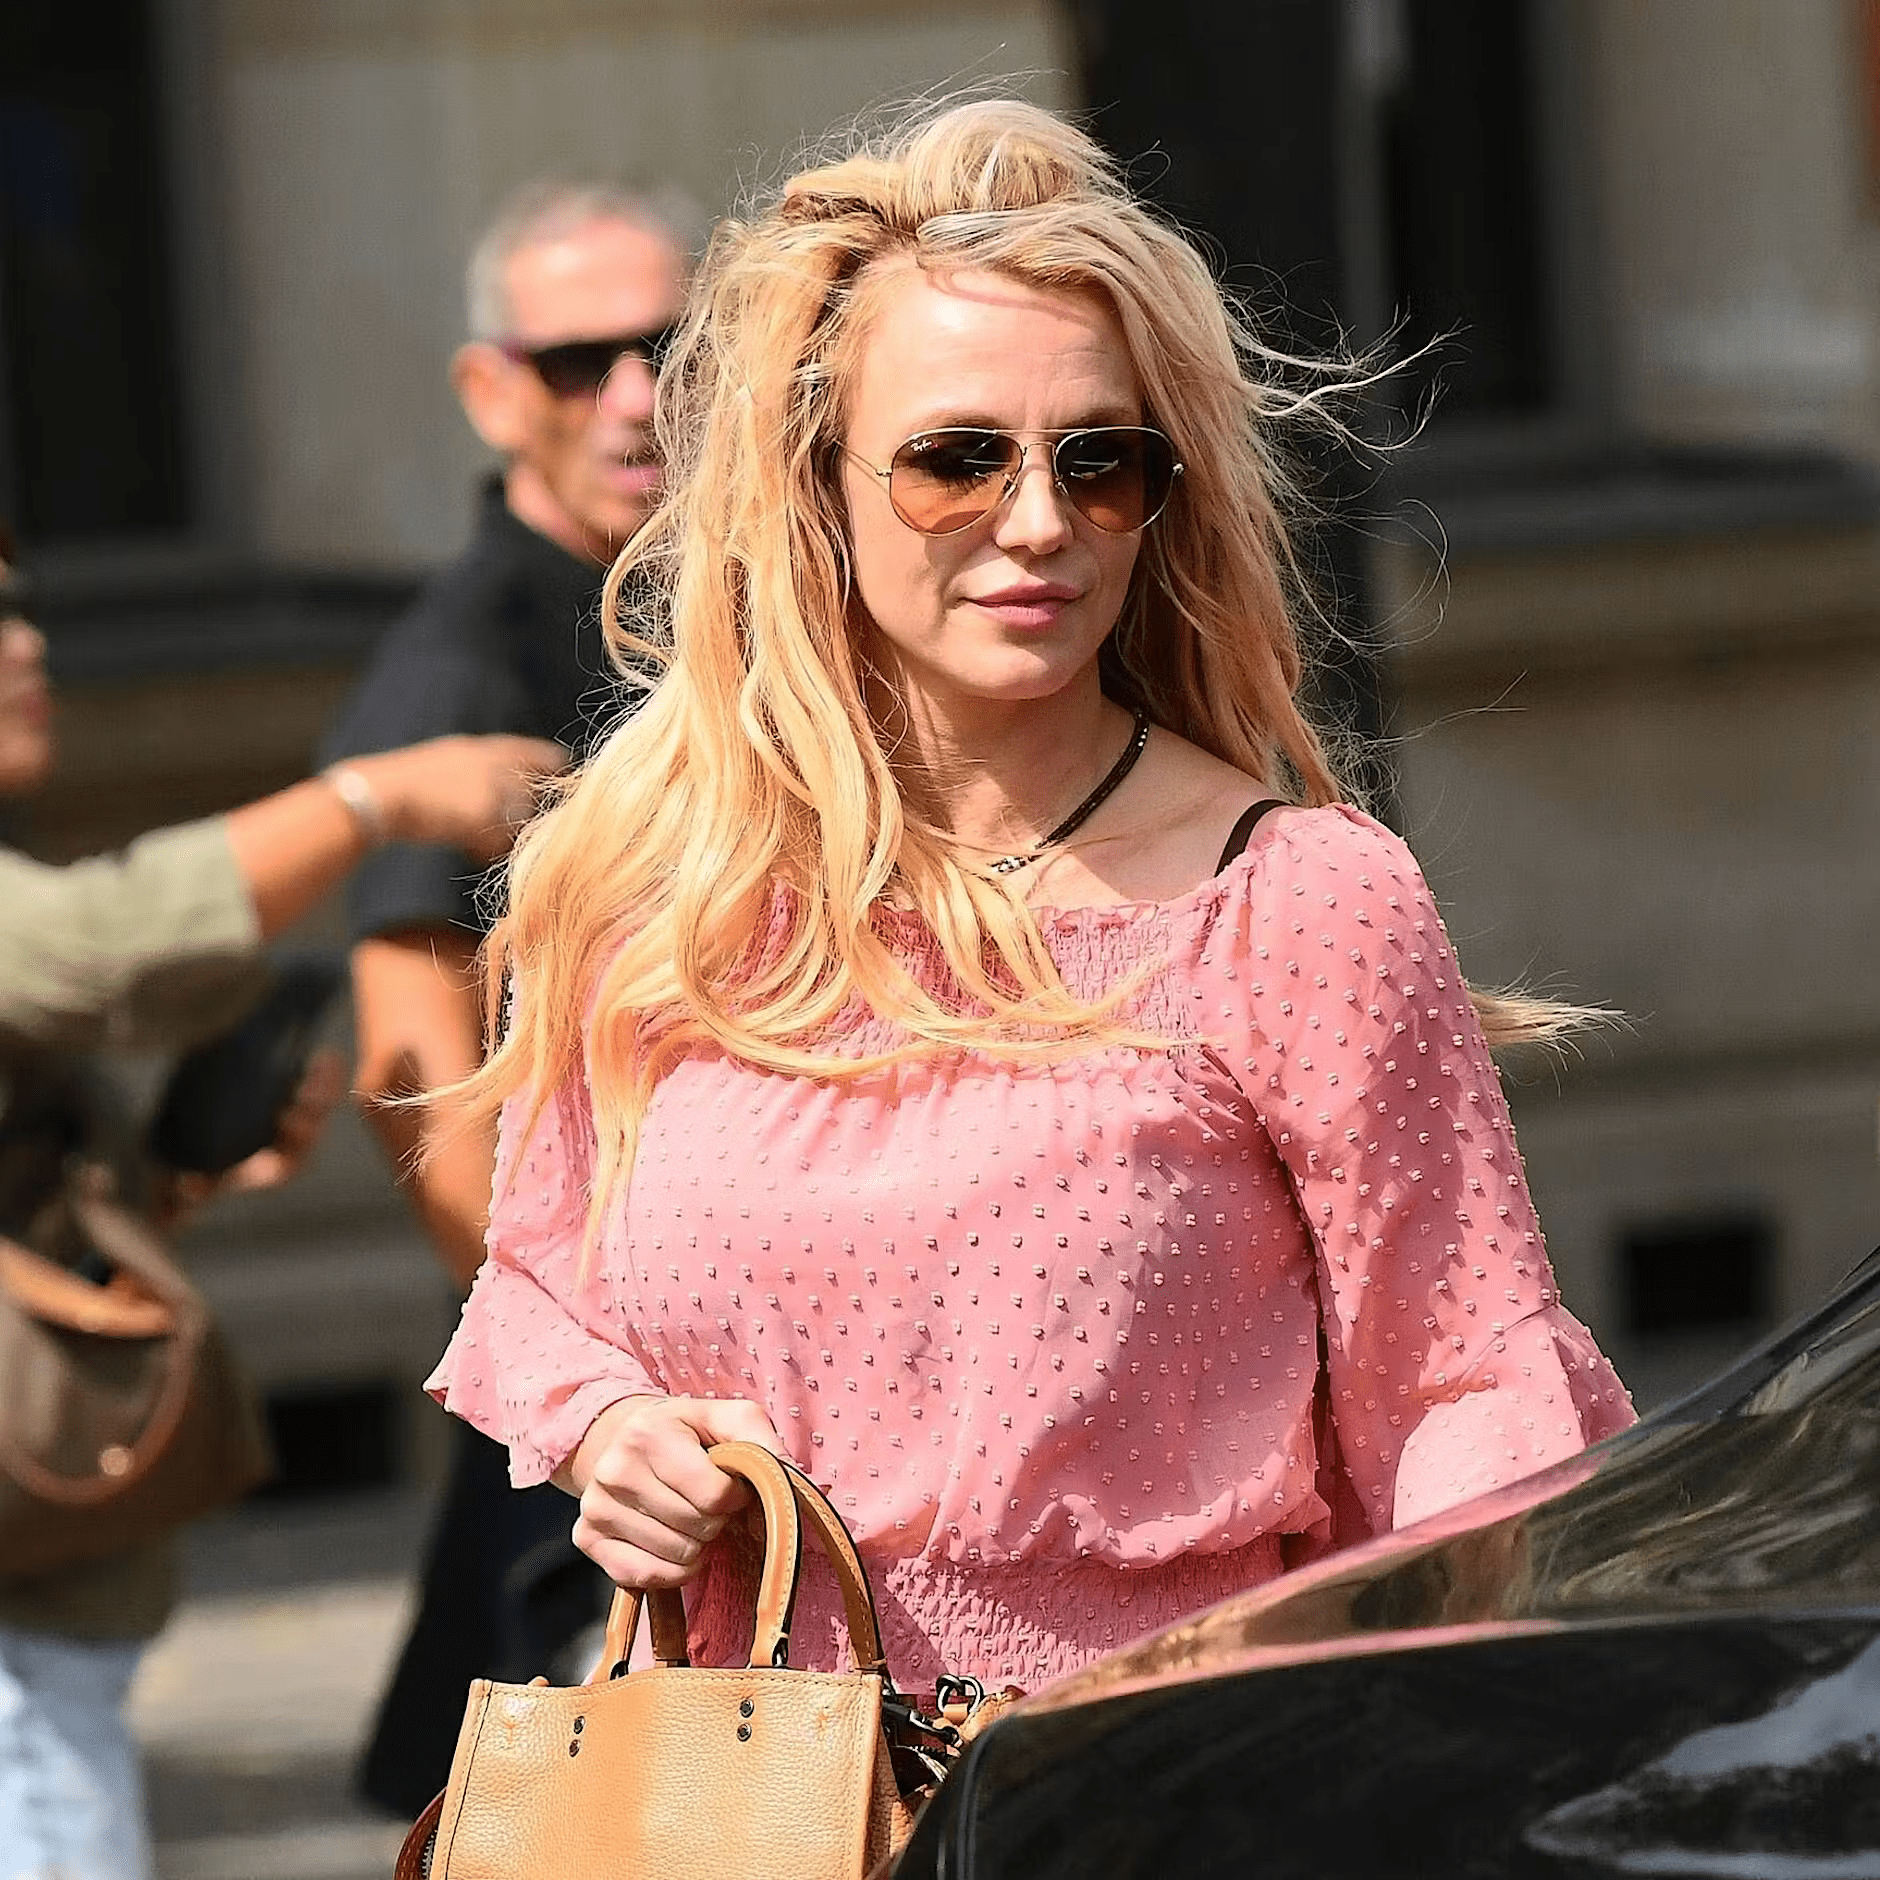 Britney Spears Accuses Dad of Using Her Image for His 'Cash Flow,' Claims He Told Her 'I'm Britney Spears Now'